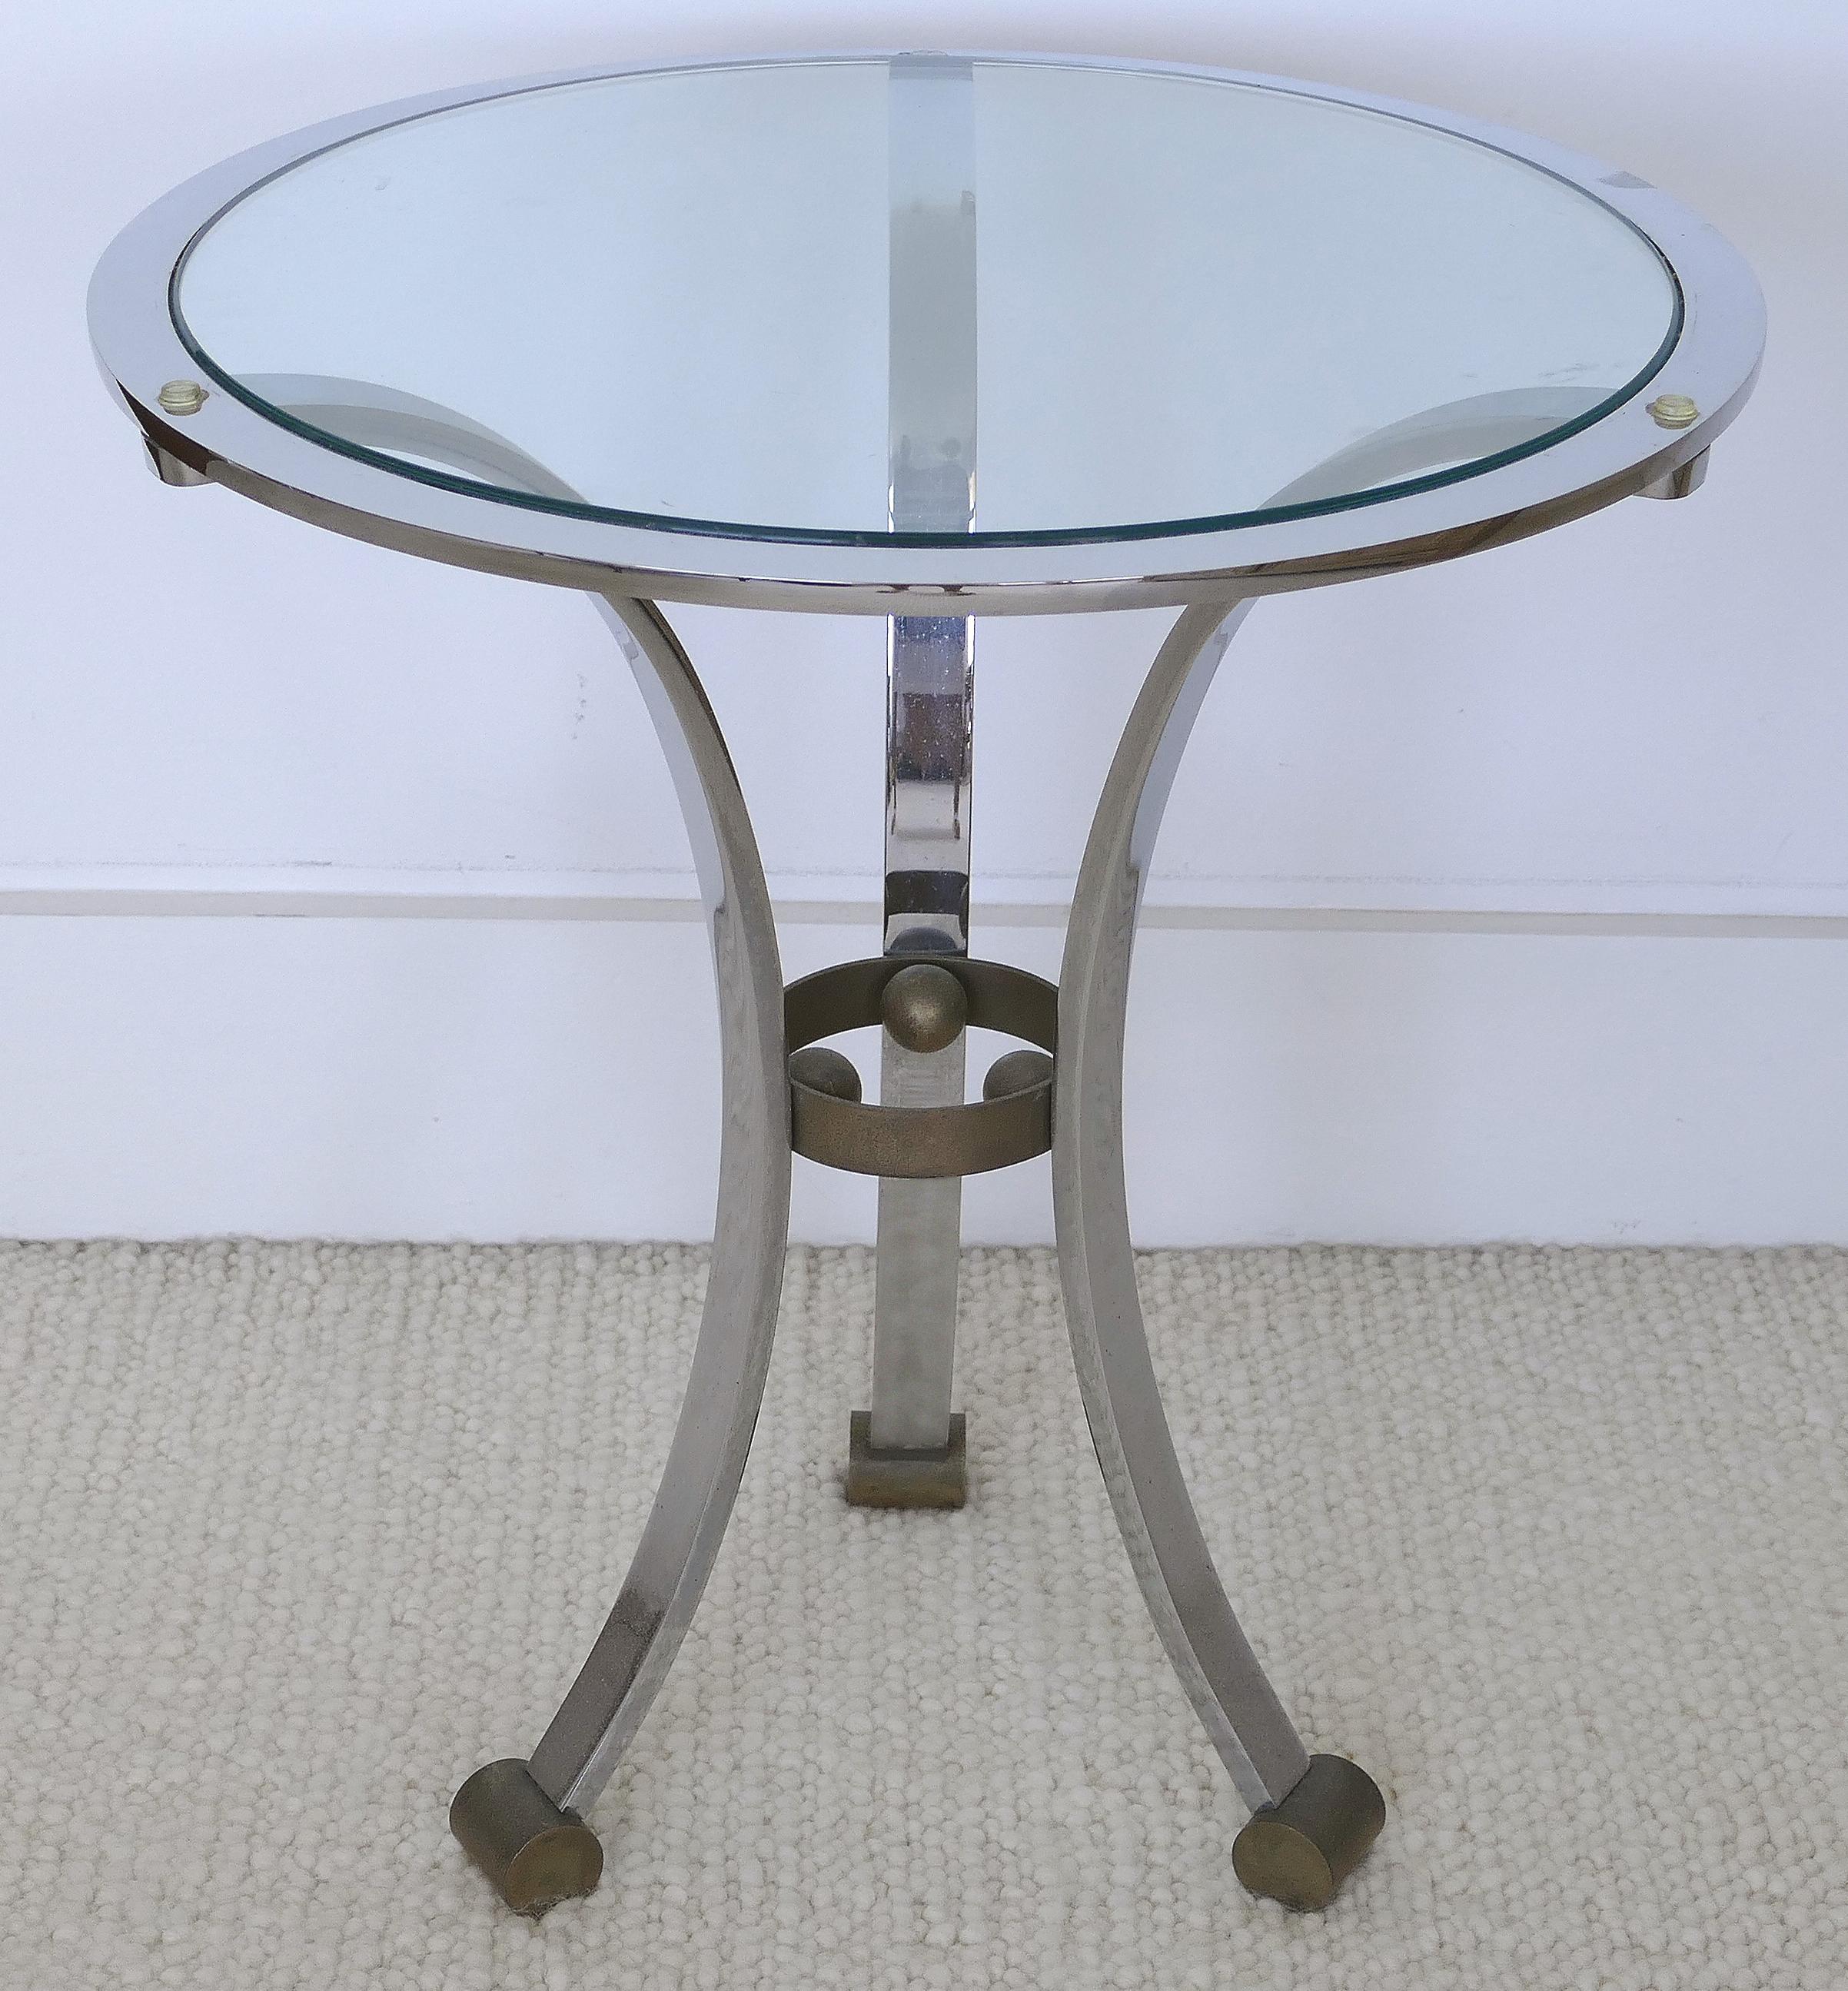 Maison Jansen attributed Gueridon table in stainless steel and bronze

Offered for sale is a fine and elegant gueridon side table of stainless steel and bronze attributed to Maison Jansen. The table has an inset glass top.